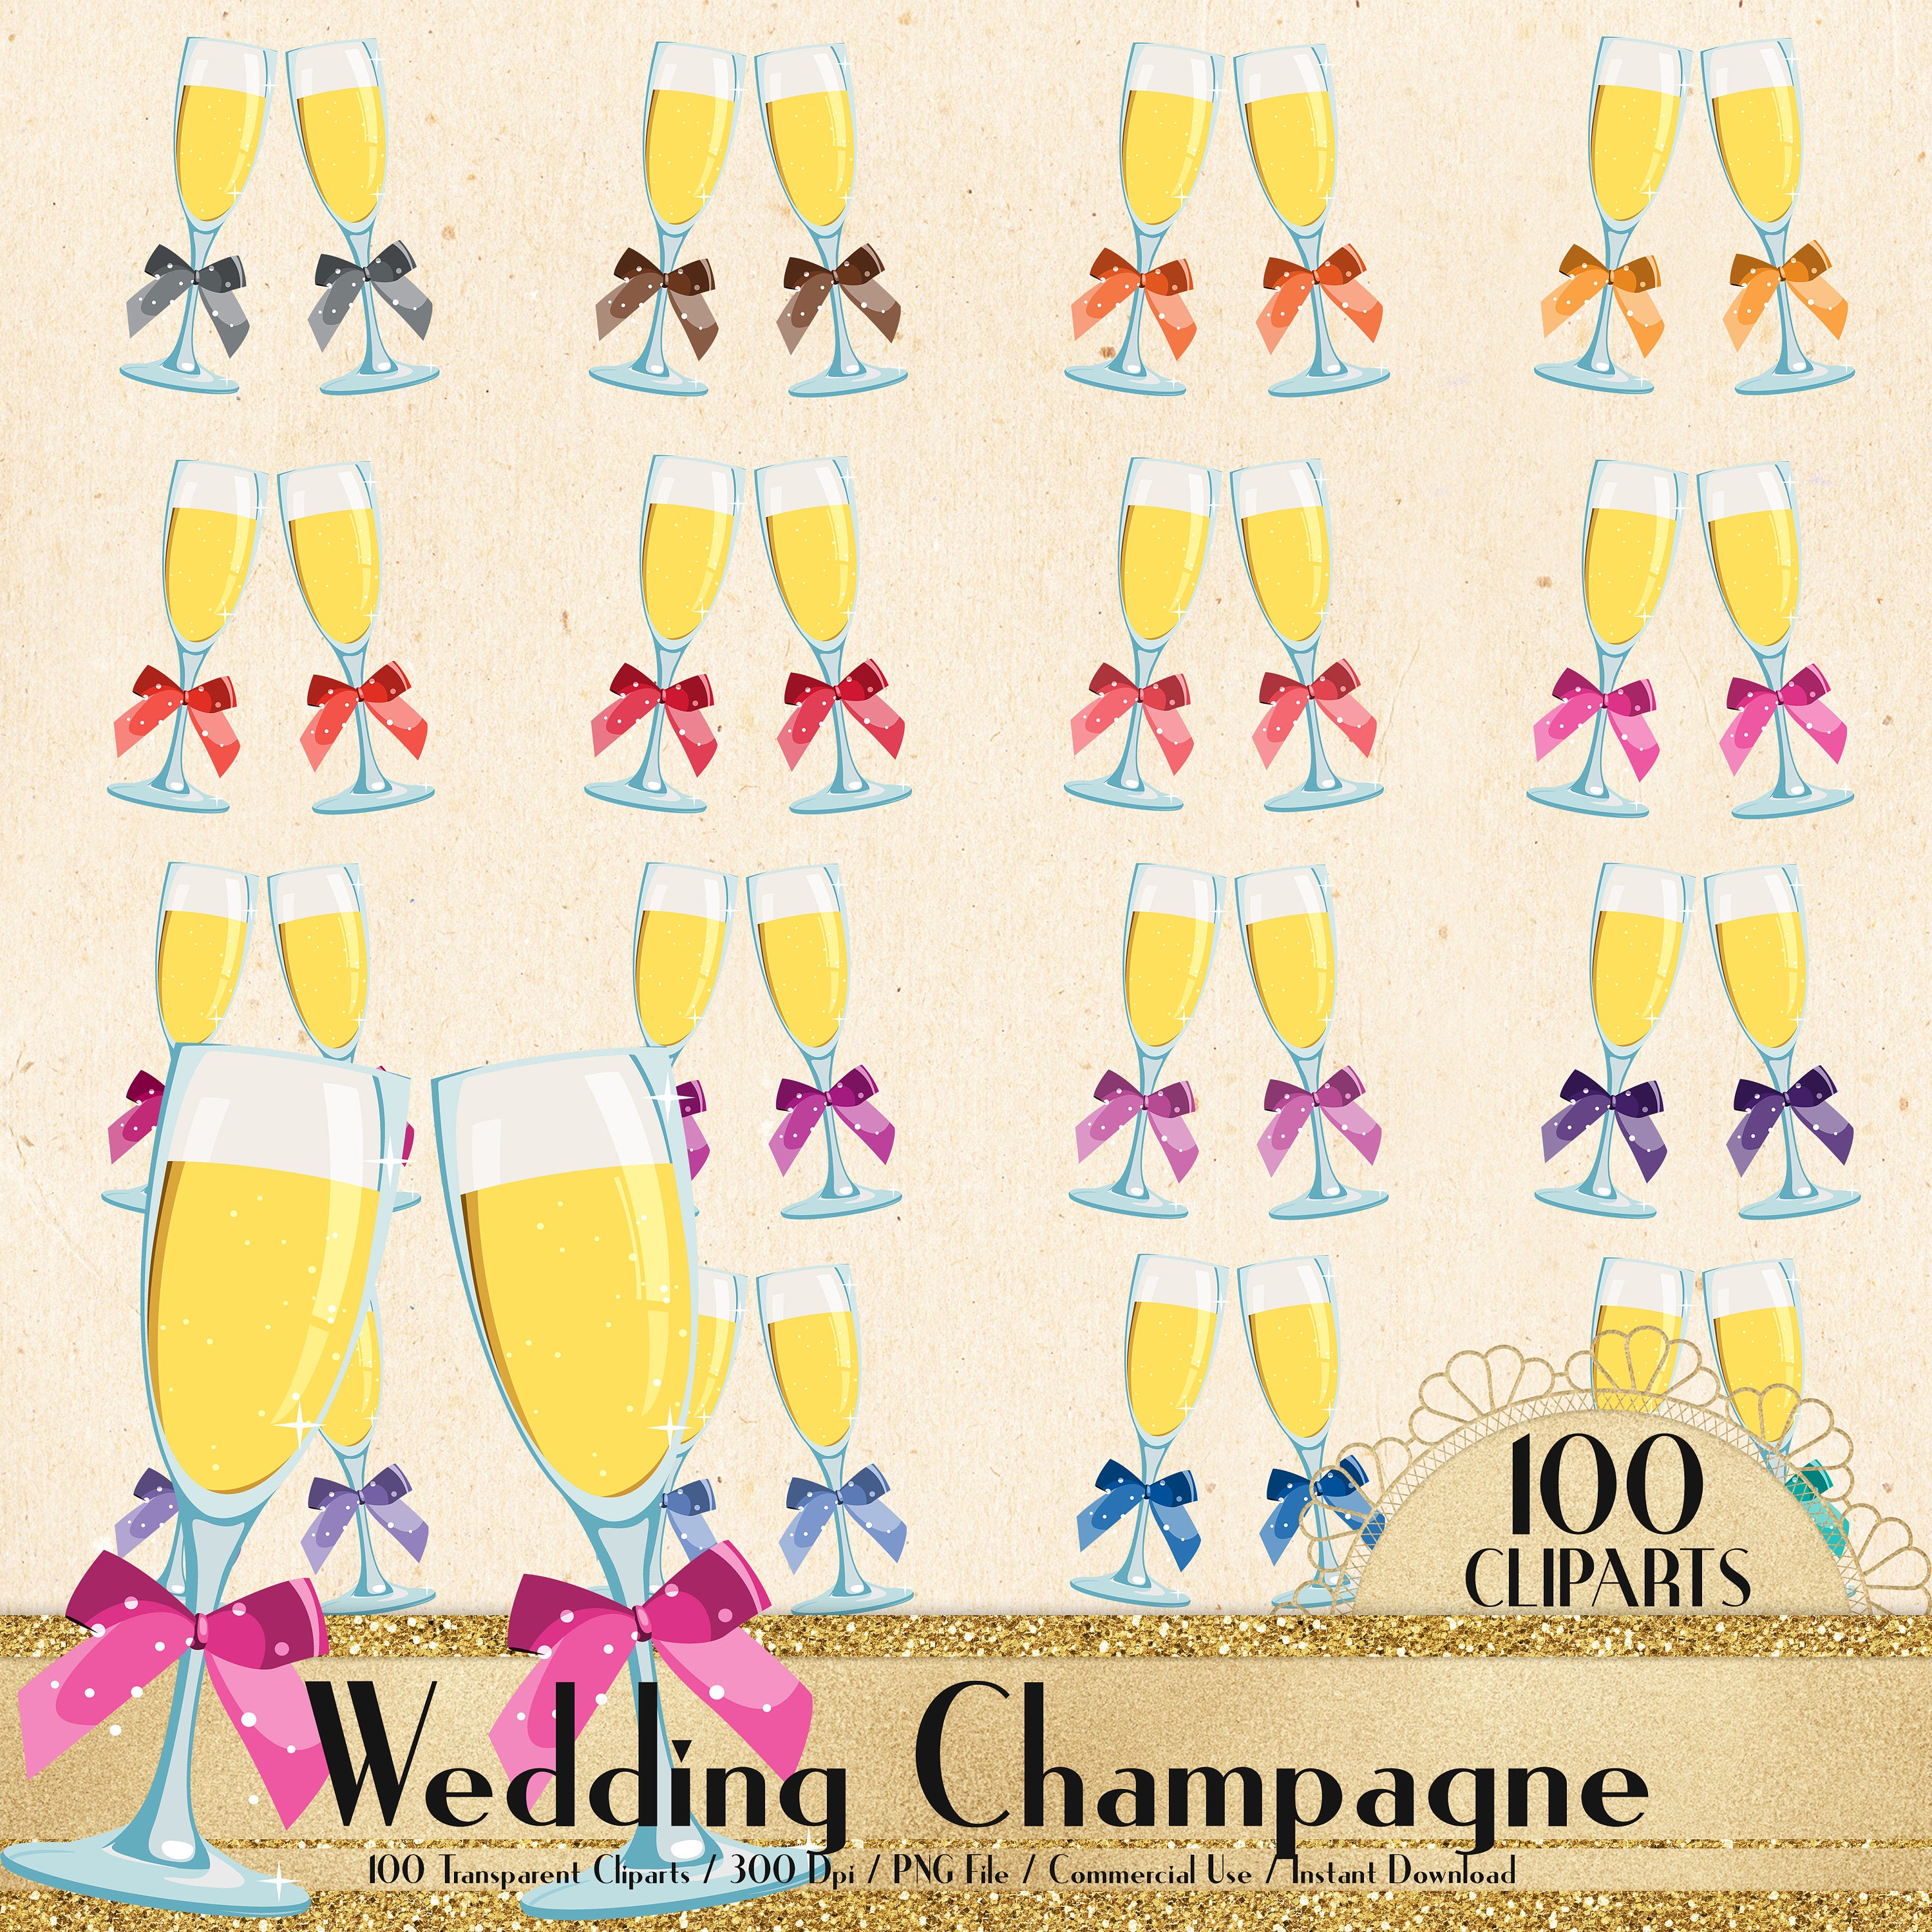 100 Wedding Champagne Glass Cliparts, Planner Clipart, Bridal Shower, Bride and Broom, Champagne Flutes, Wedding Decoration